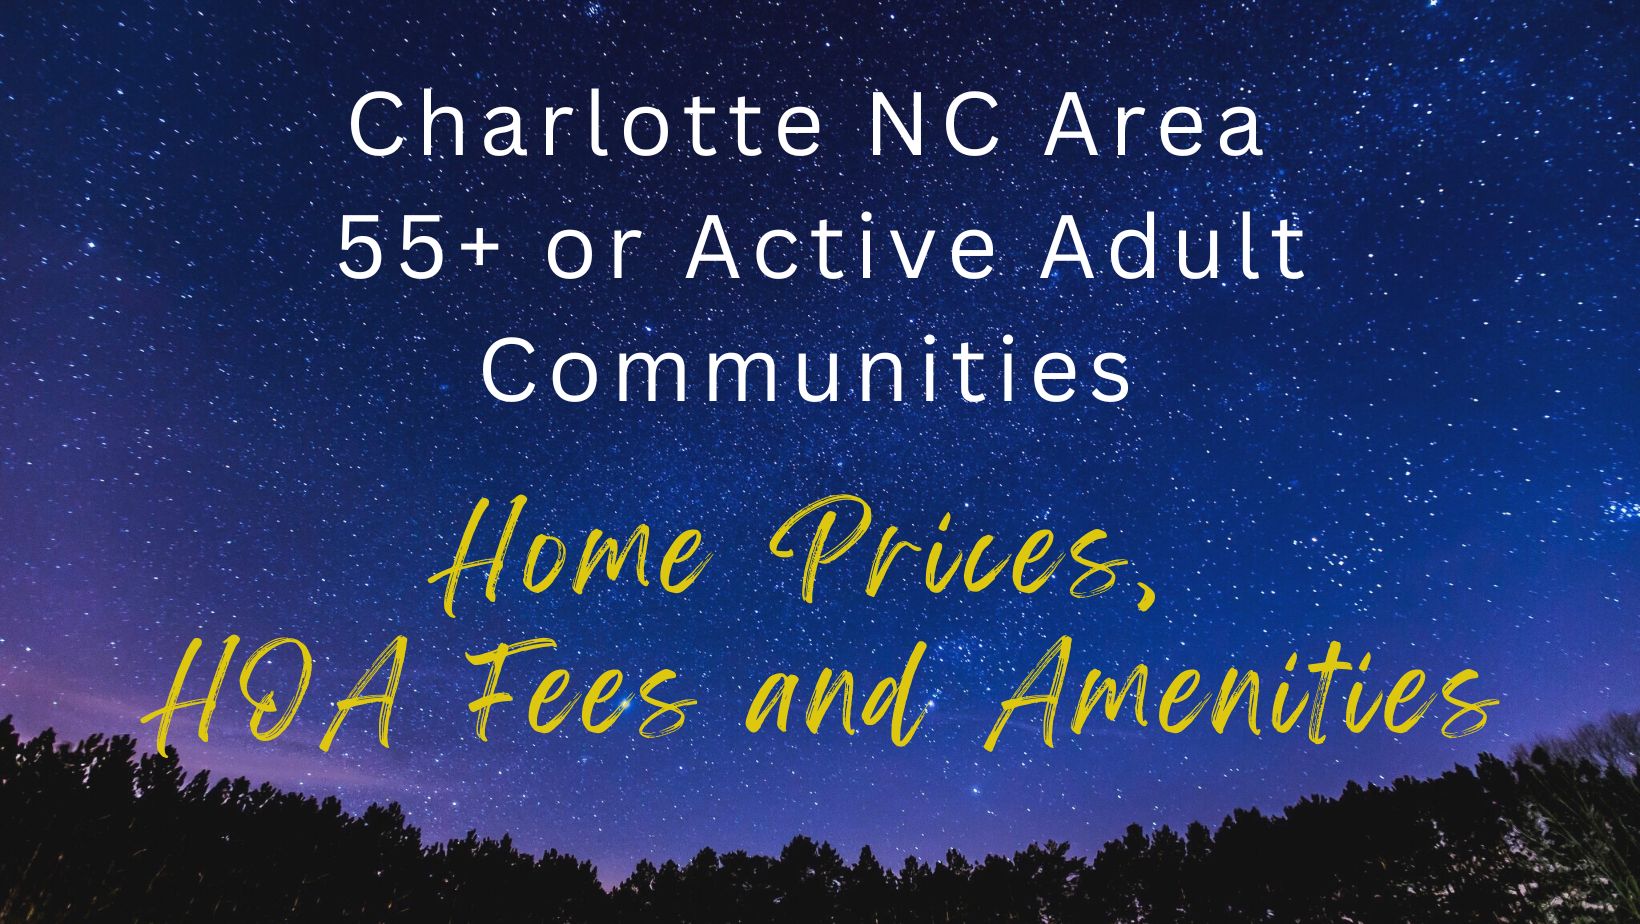 Charlotte 55+ or Active Adult Home Prices, HOA Fees